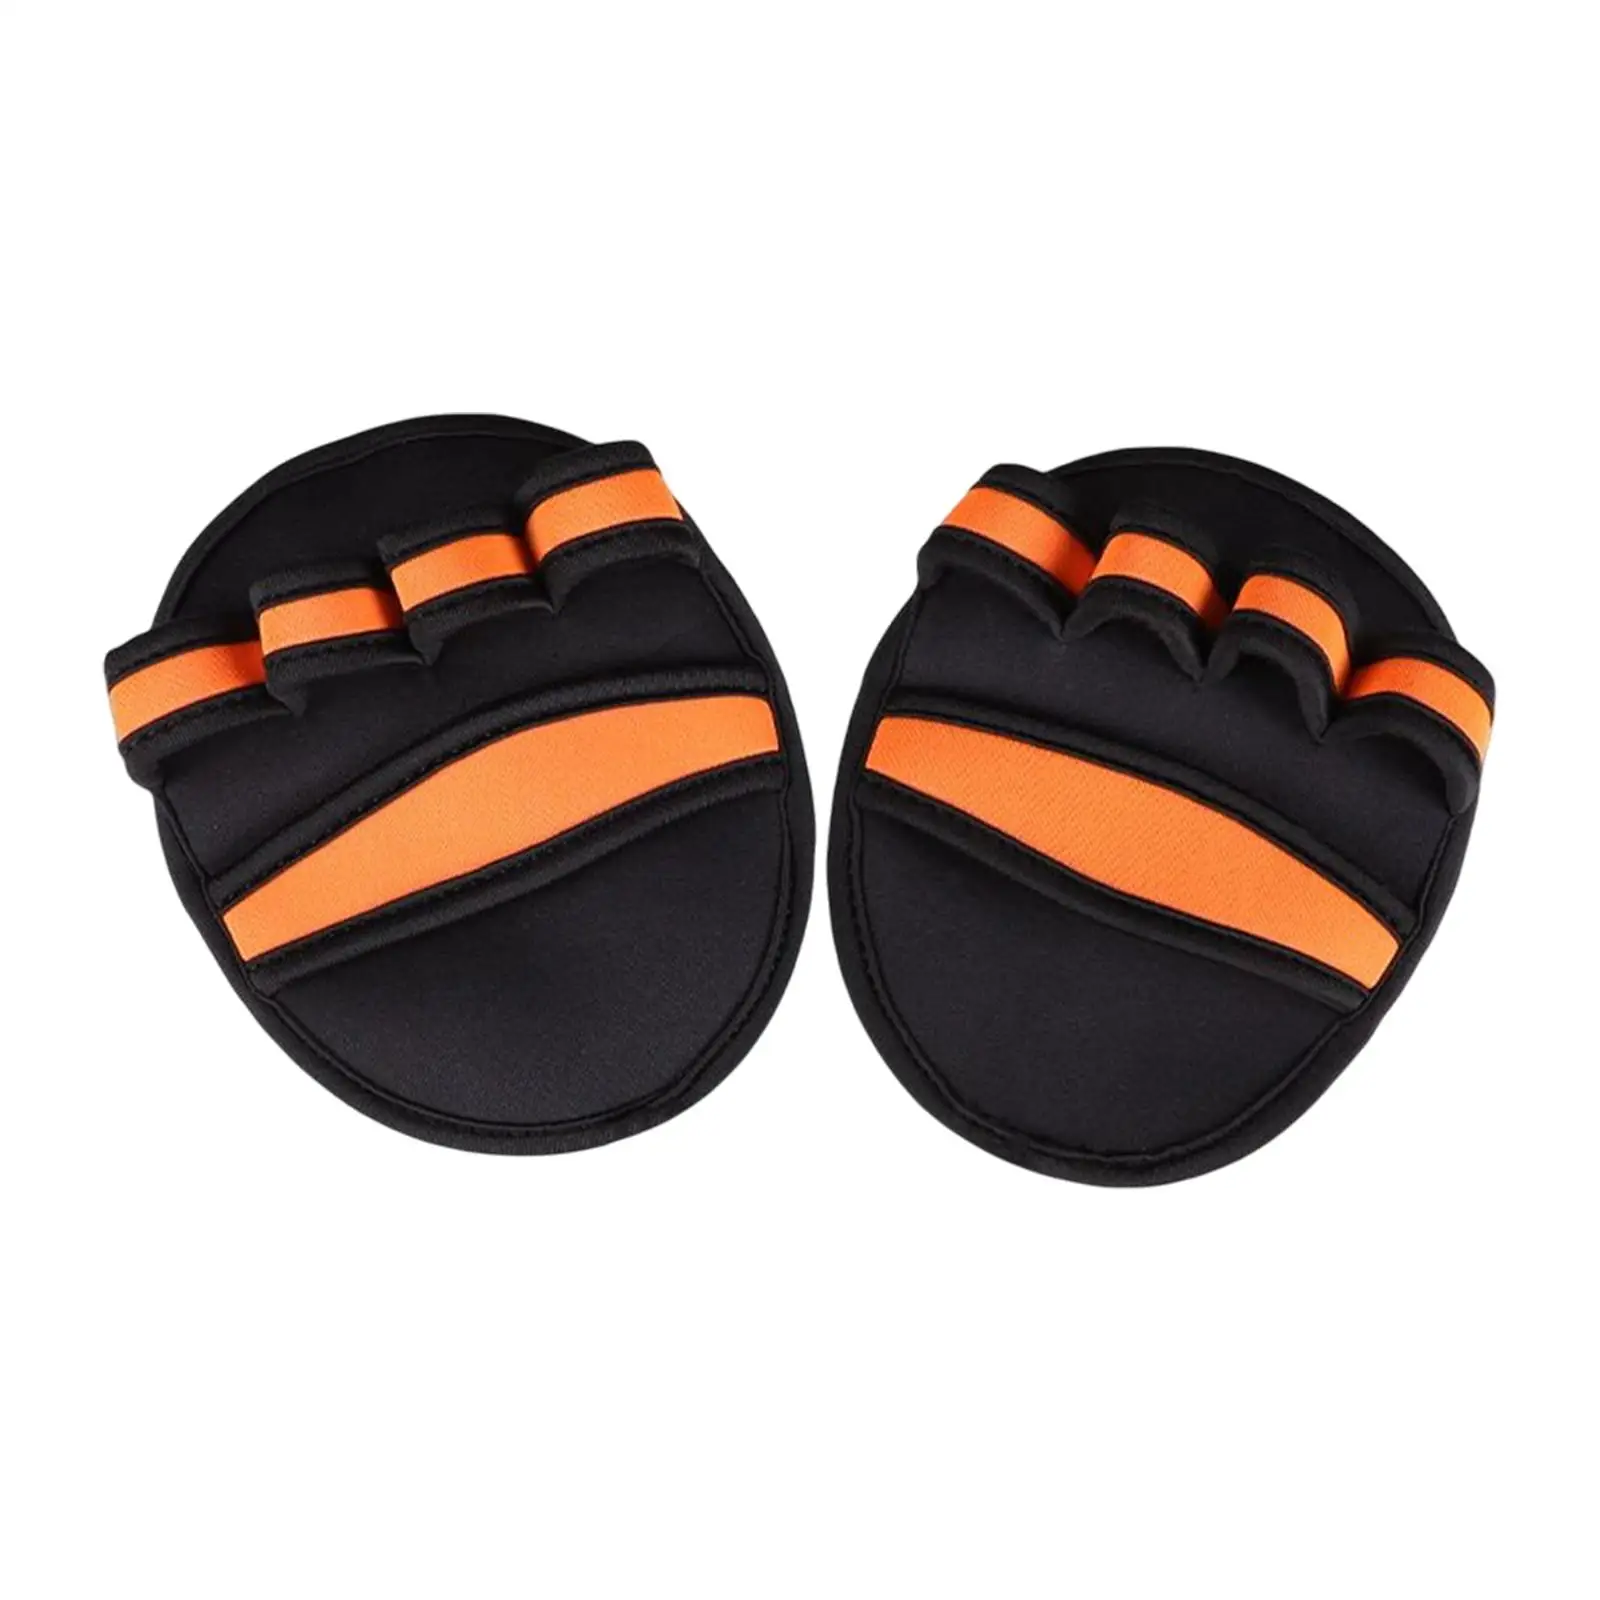 Gym Grip Pads Workout Gloves Anti Slip Gyms Exercise Gloves for Lifting Dumbbell Grips Push Ups